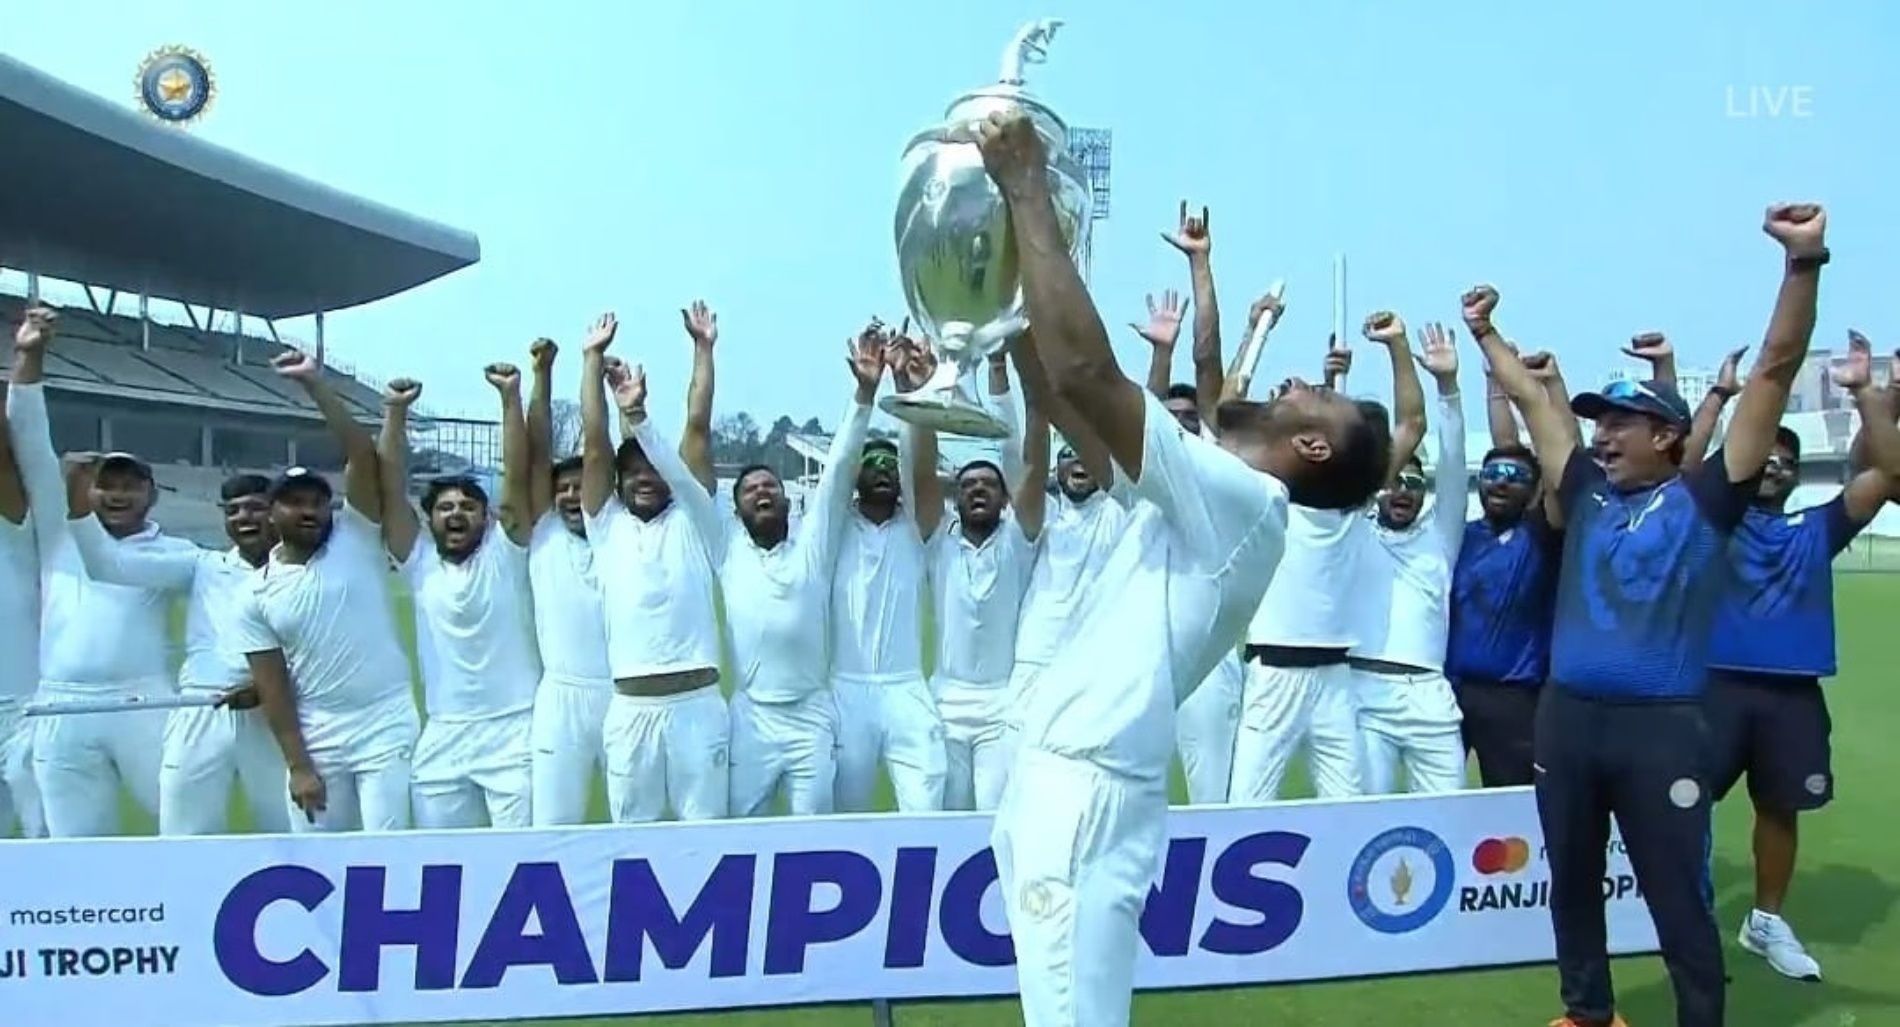 Saurashtra defeated Bengal to win the Ranji Trophy 2022-23. [P/C: BCCI]